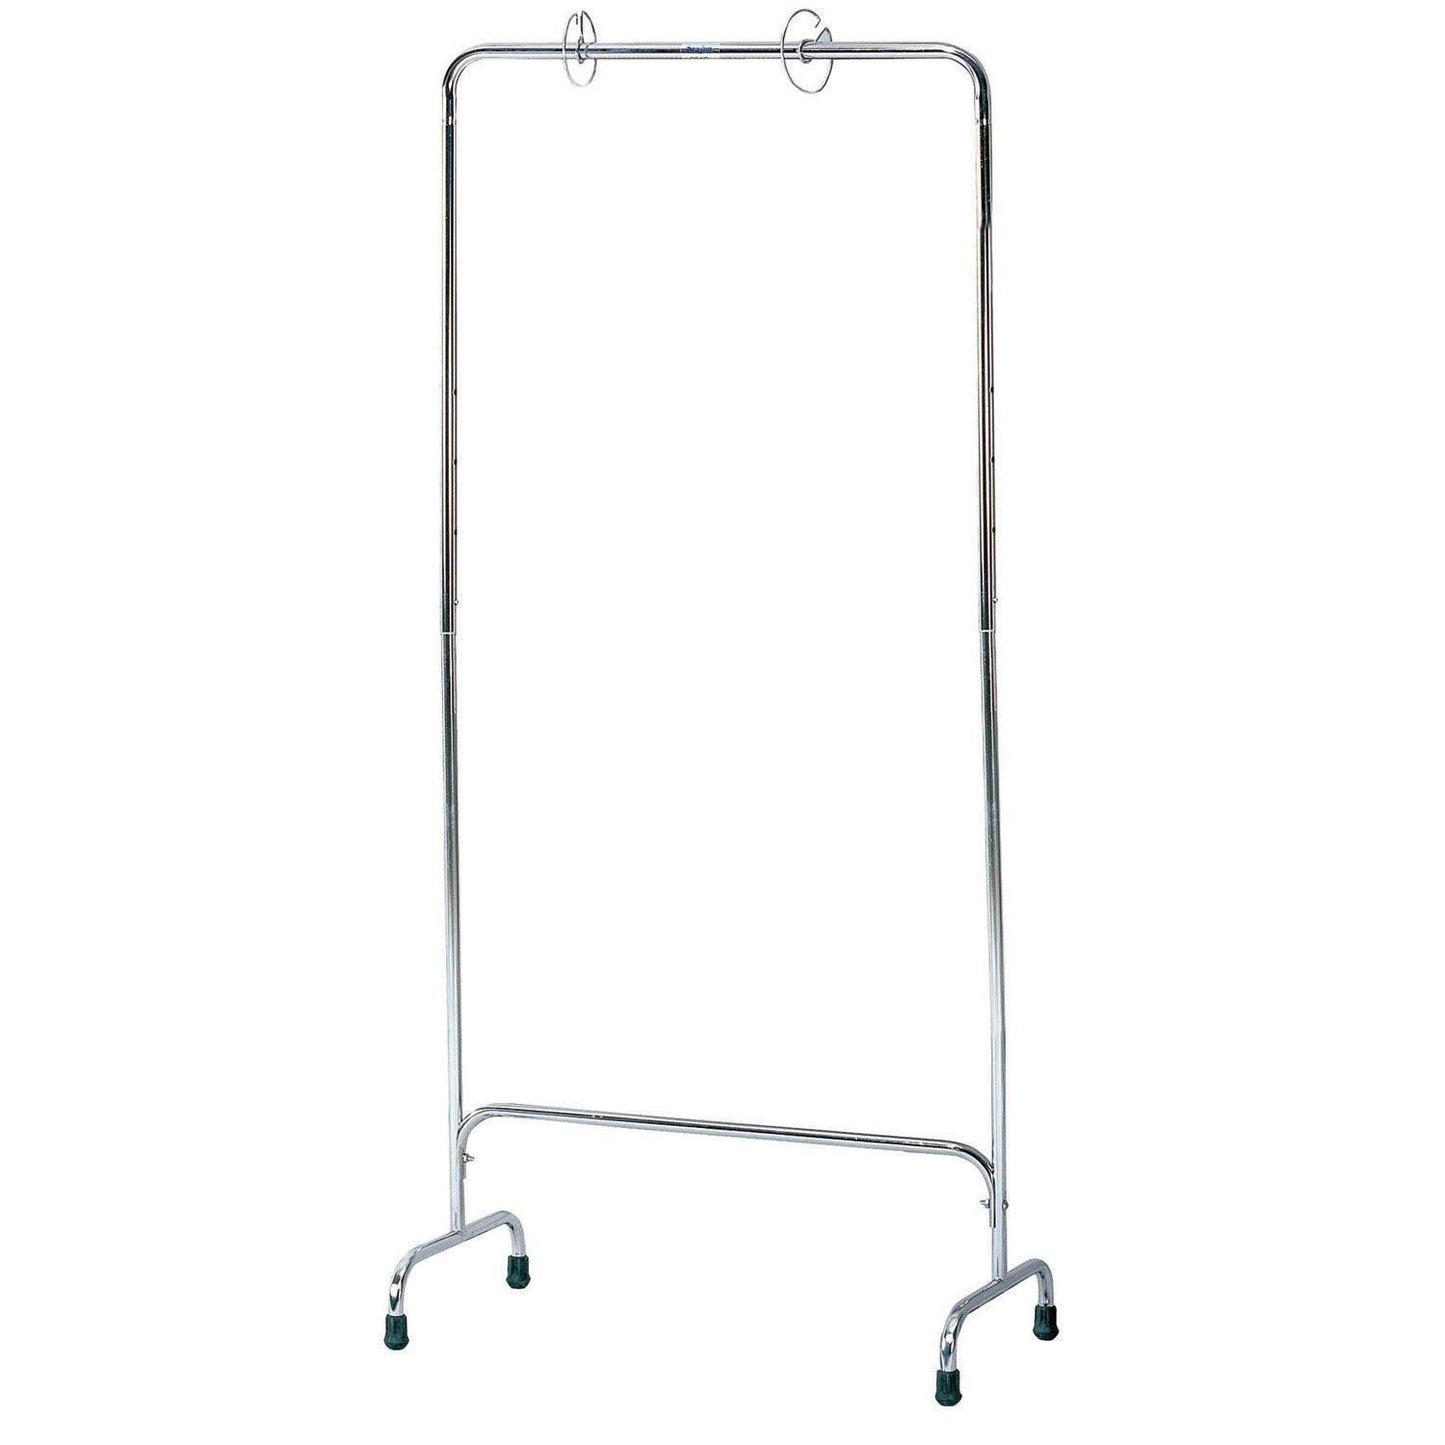 Chart Stand, Adjustable, Metal, Adjustable to 64"H, 28" Wide, 1 Stand - Loomini